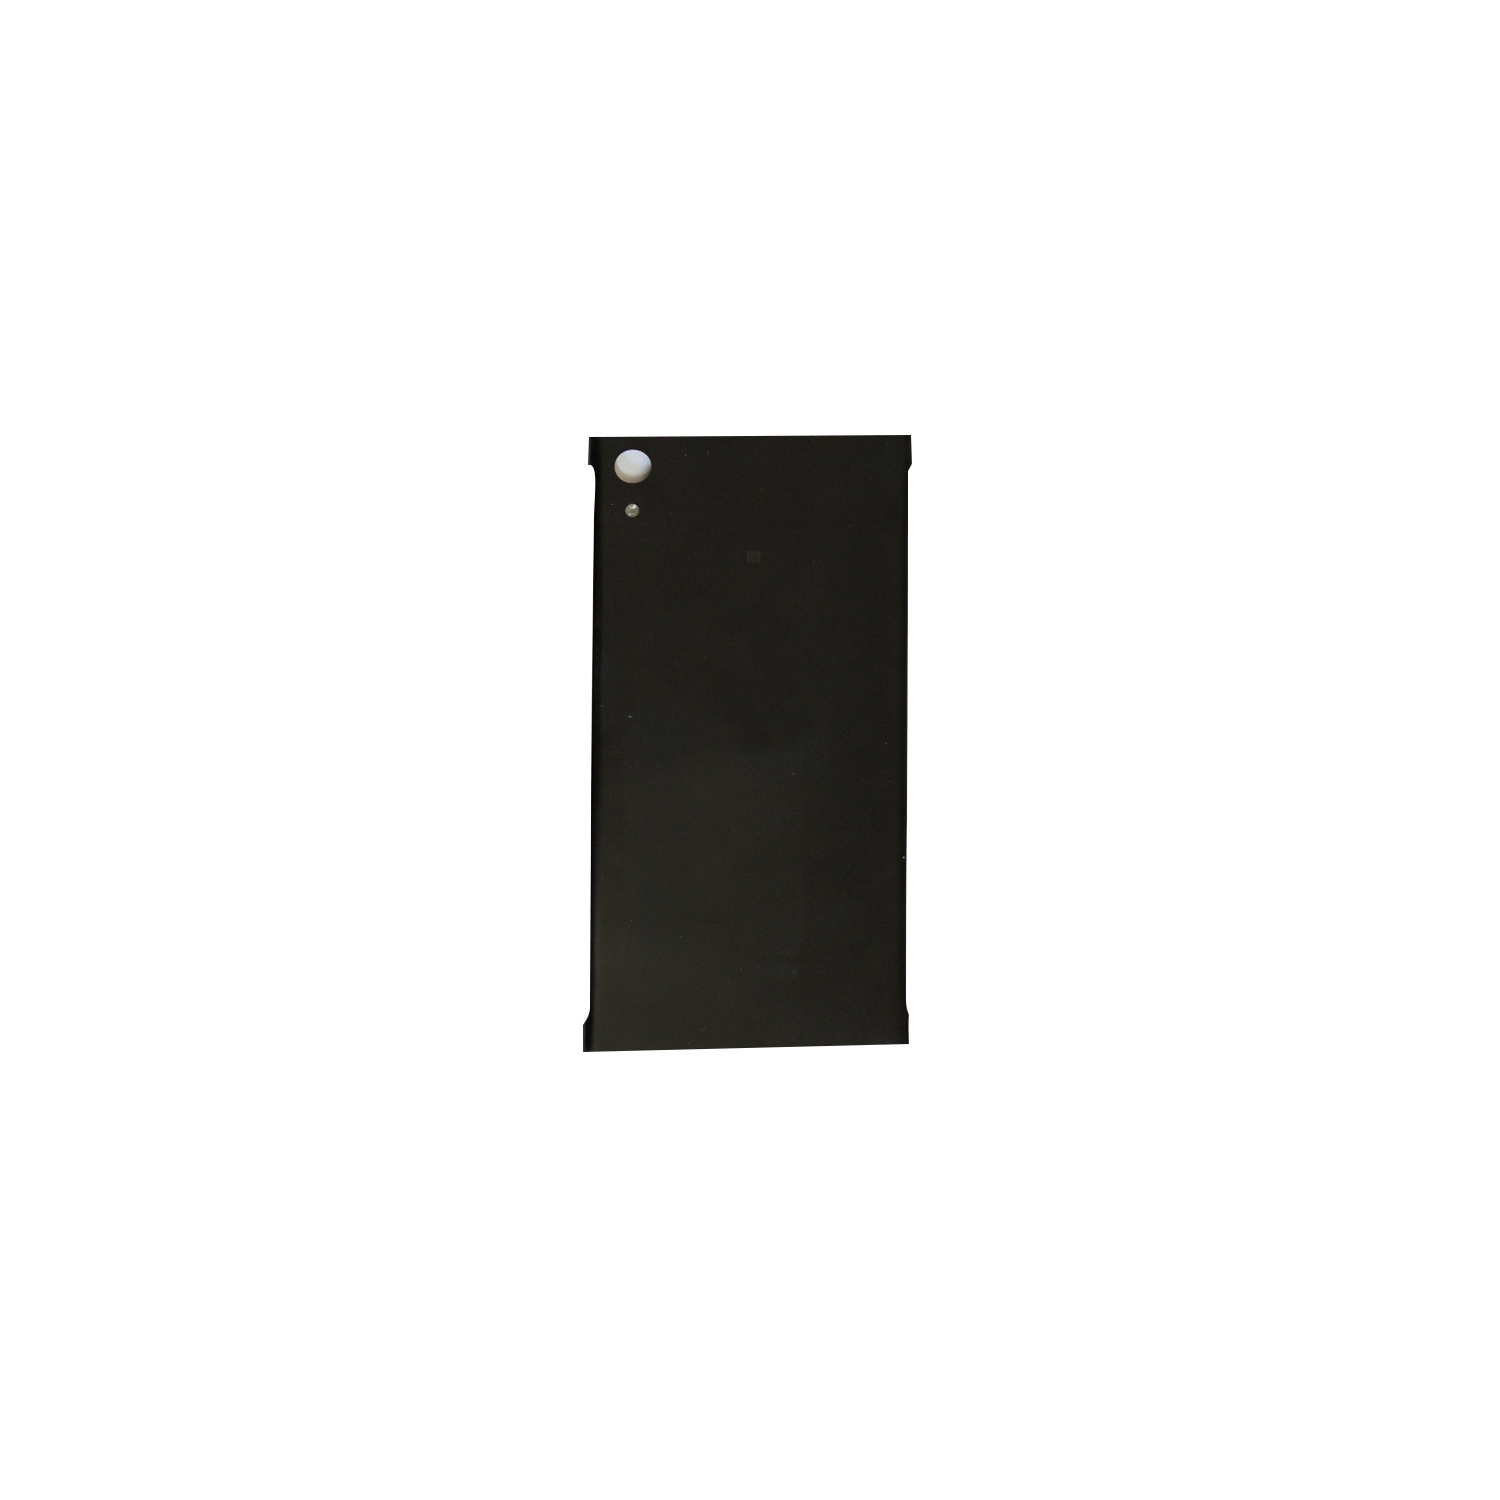 Sony Xperia XA1 Ultra G3223 Back Cover Housing Door Replacement - Black